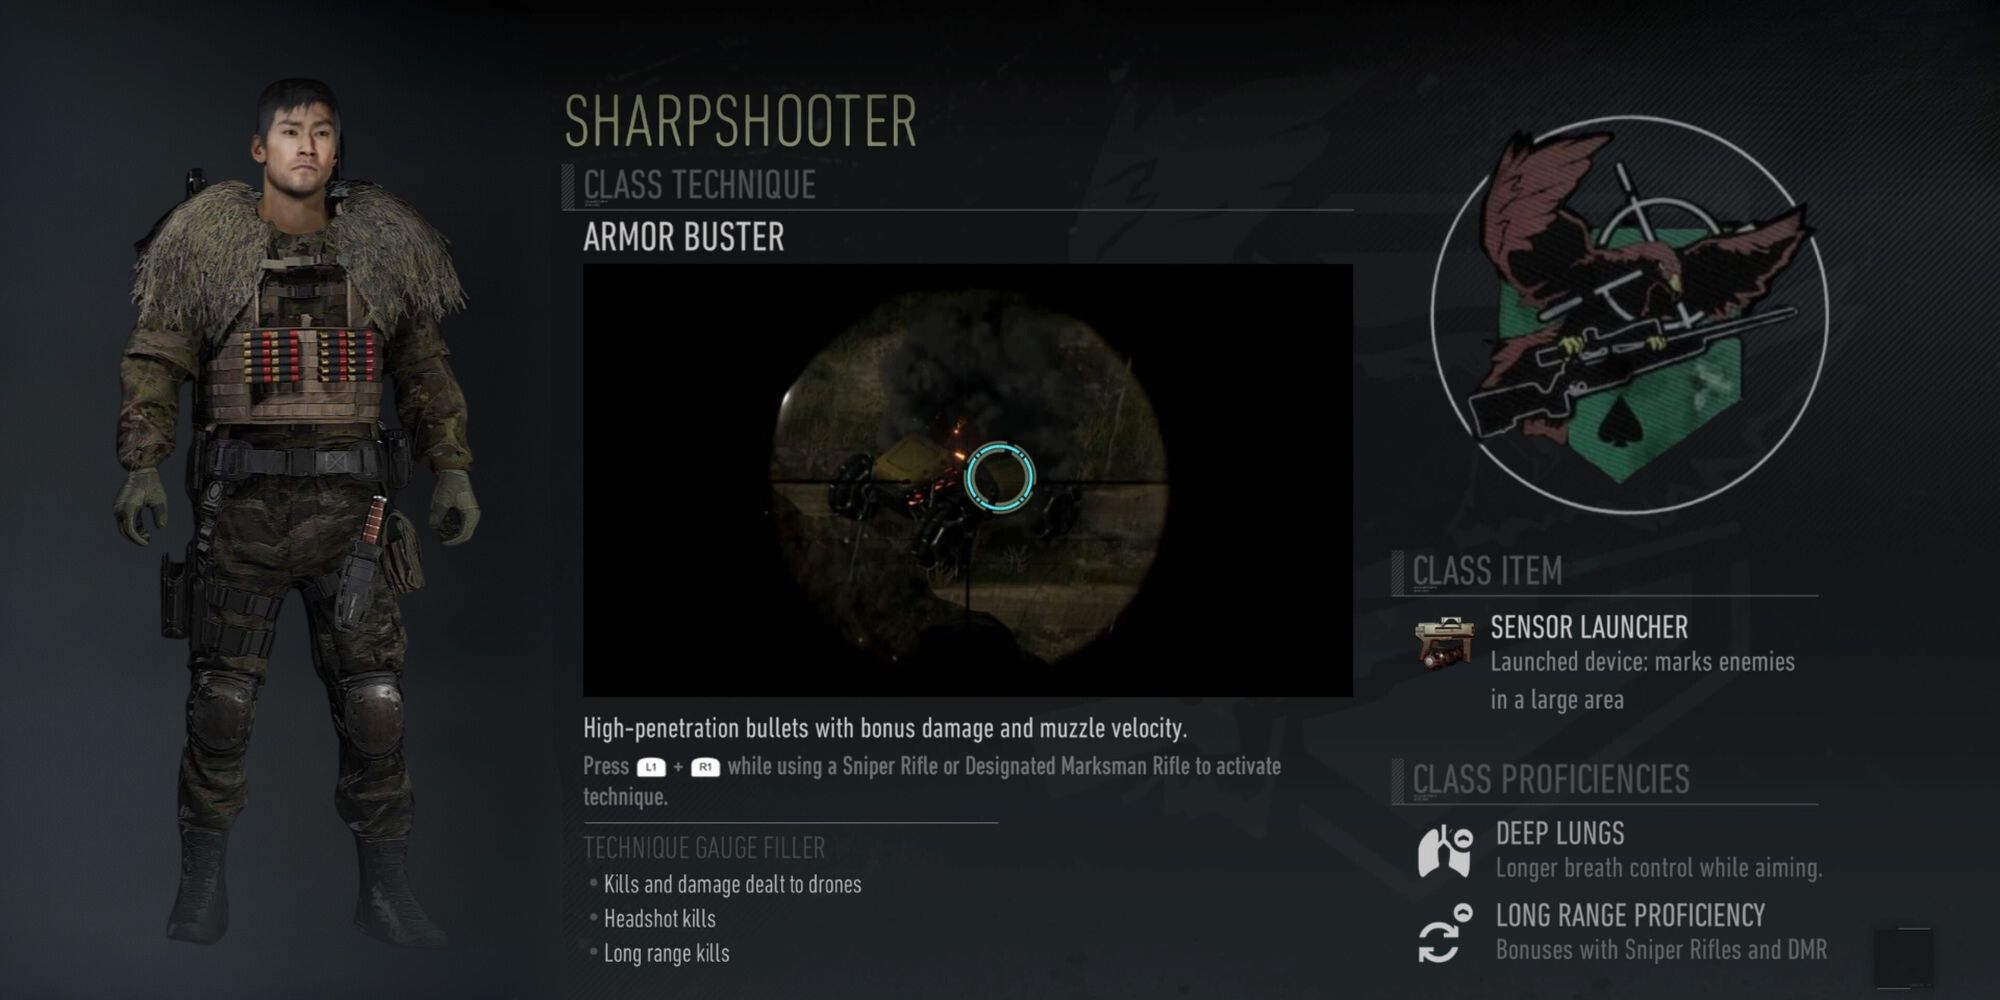 The Sharpshooter class from Ghost Recon Breakpoint accompanied by a solider and the class logo